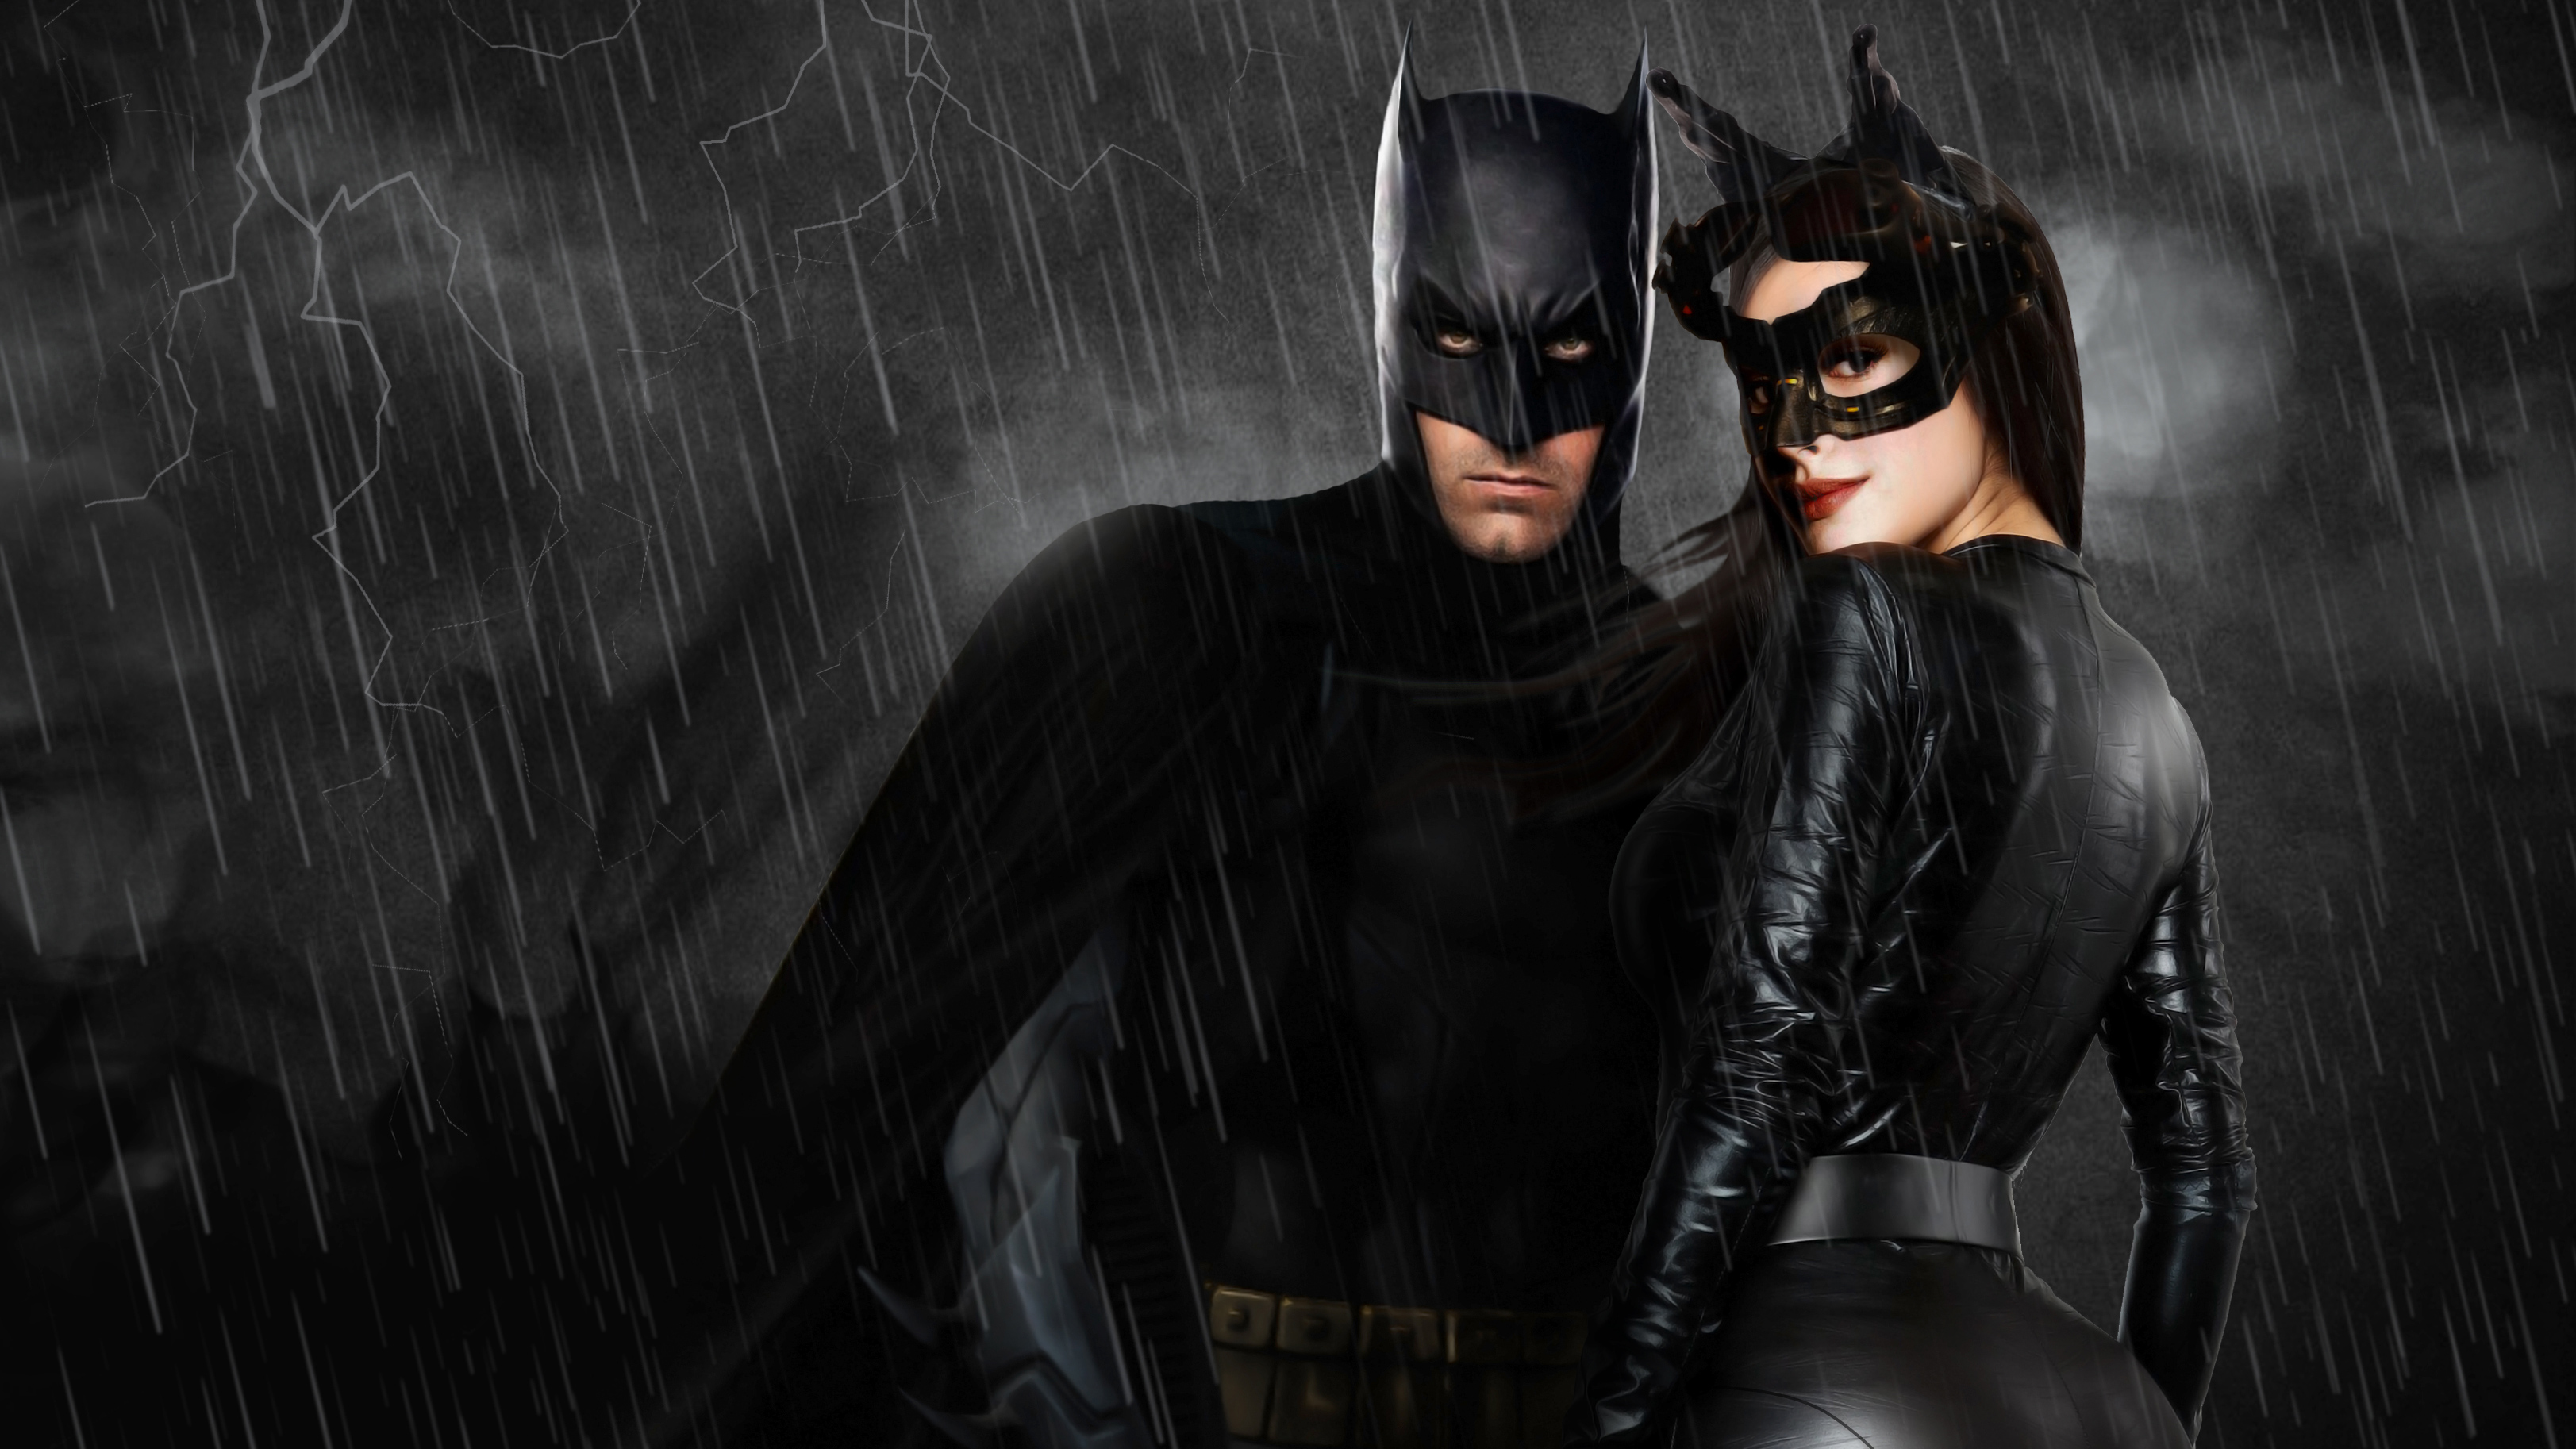 Batman And Catwoman 4k Hd Superheroes 4k Wallpapers Images | Images and ...